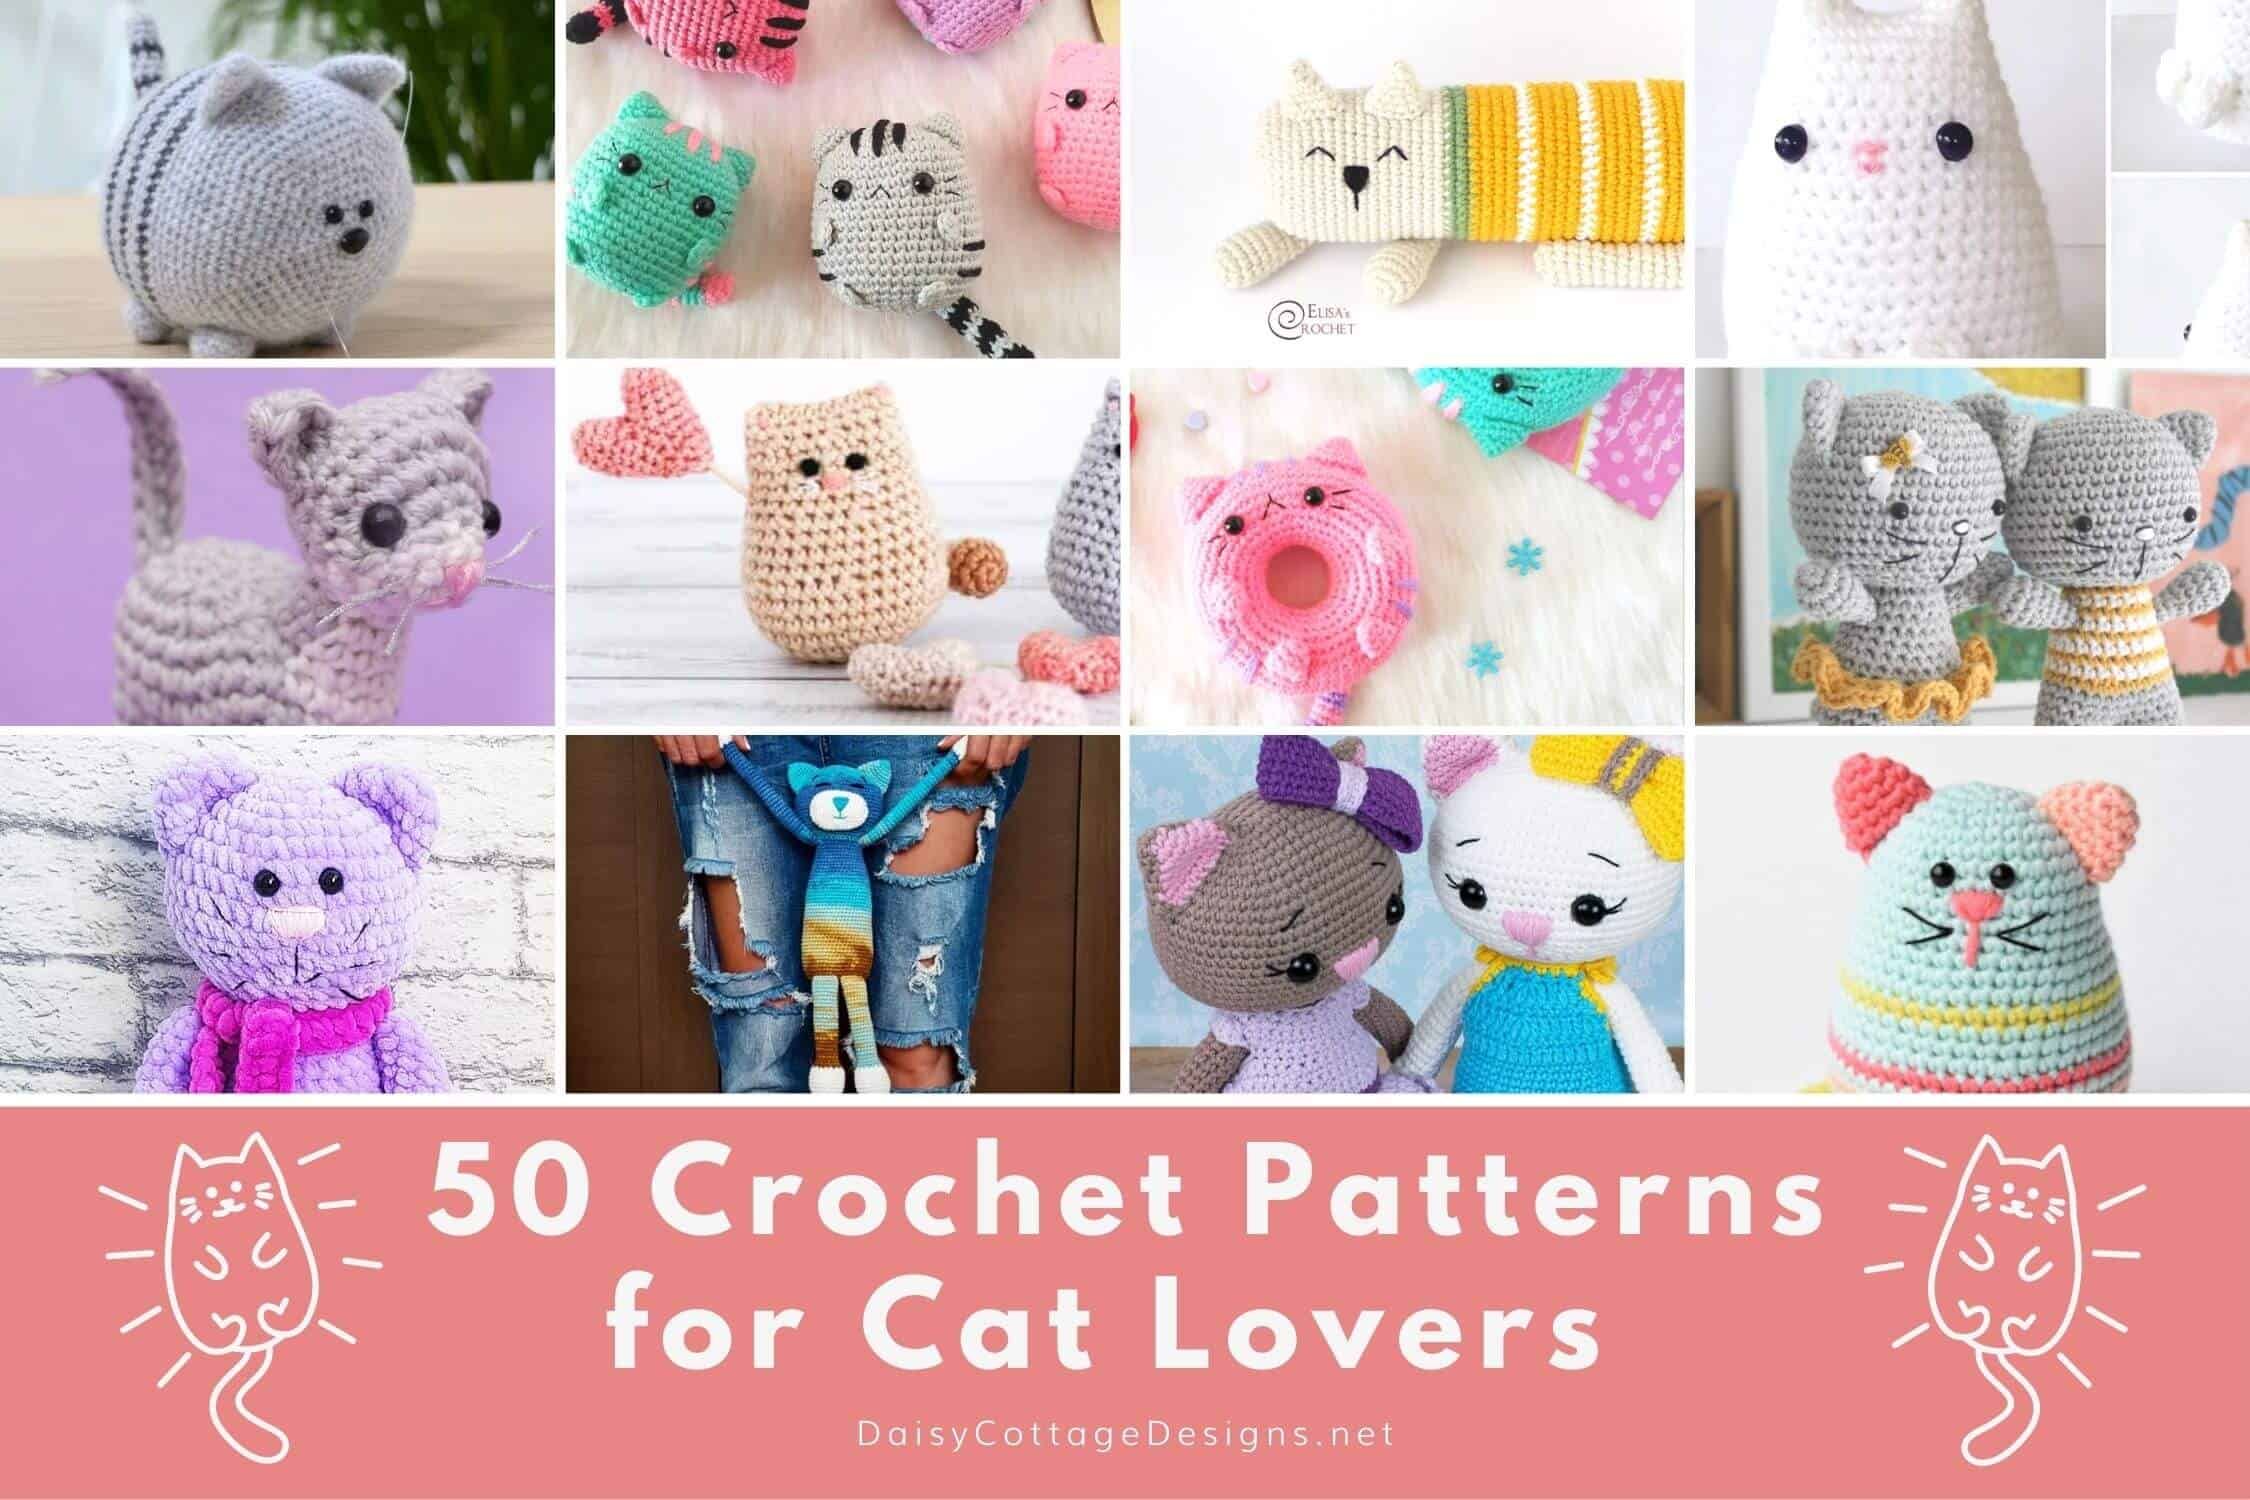 Crocheted Cats to make